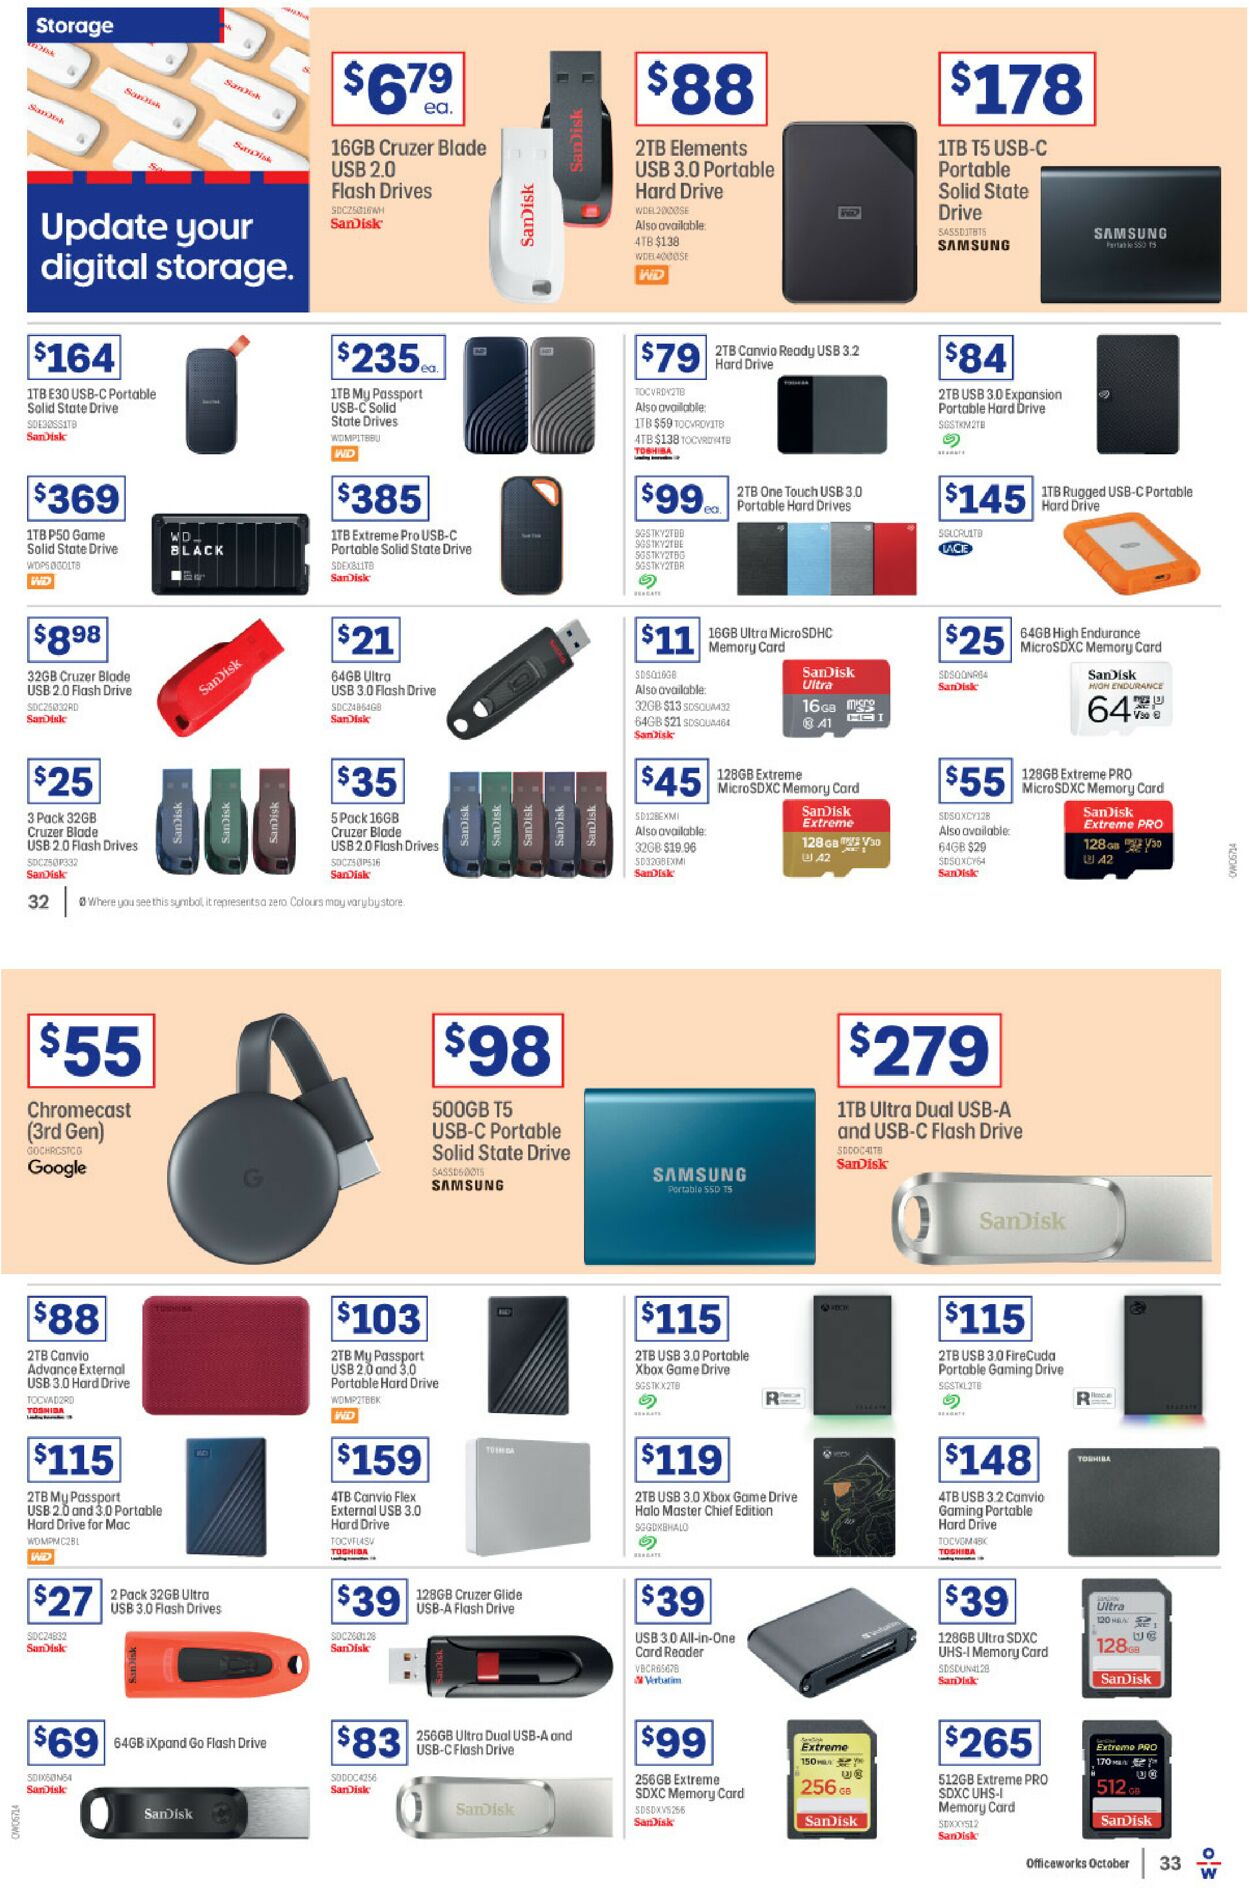 Catalogue Officeworks 14.10.2021 - 27.10.2021